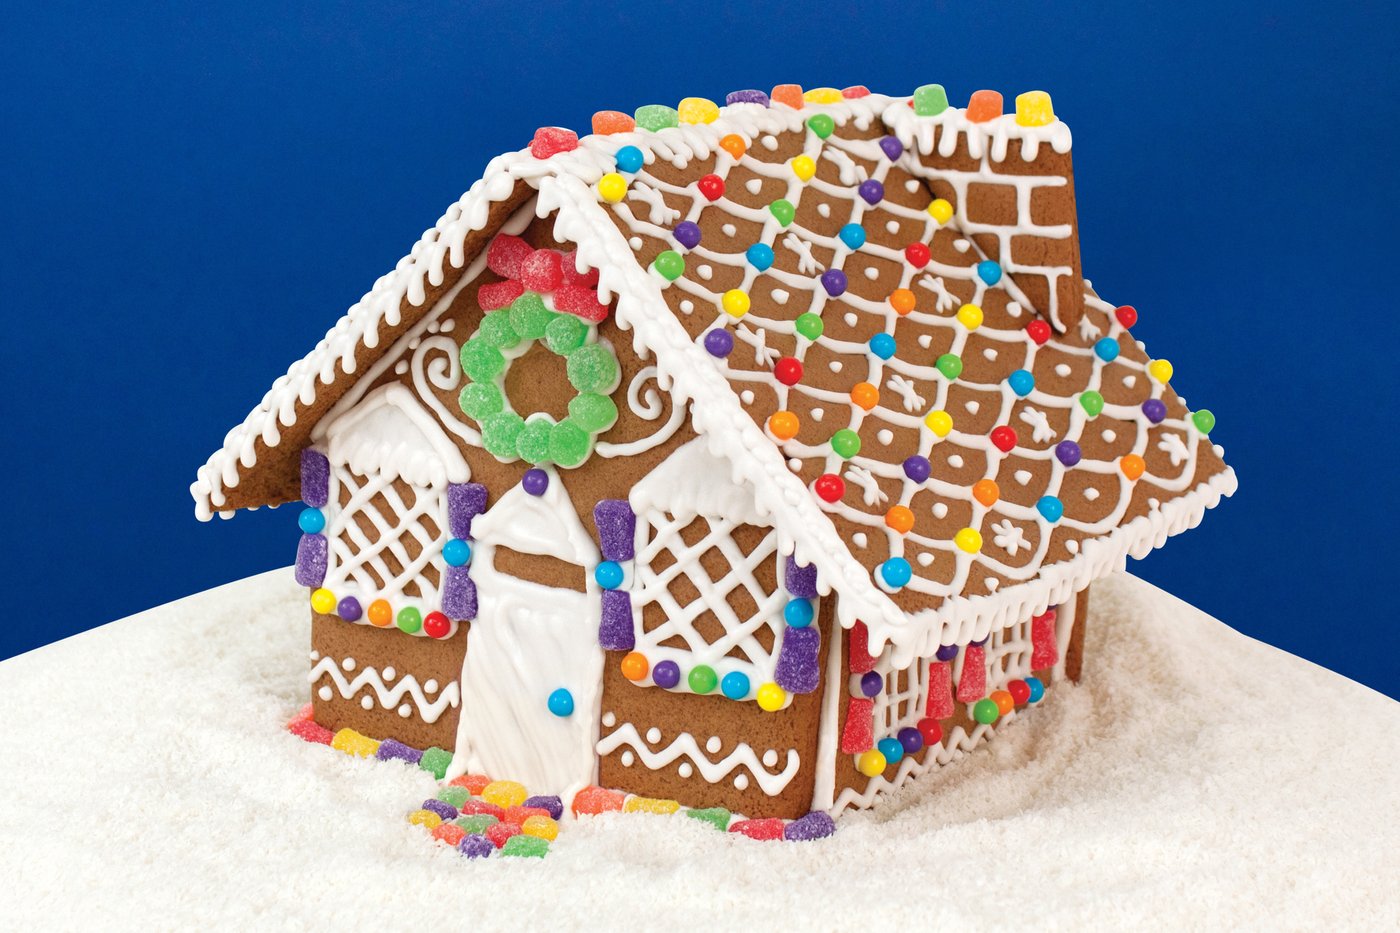 Nuts.com Gingerbread House Kit photo